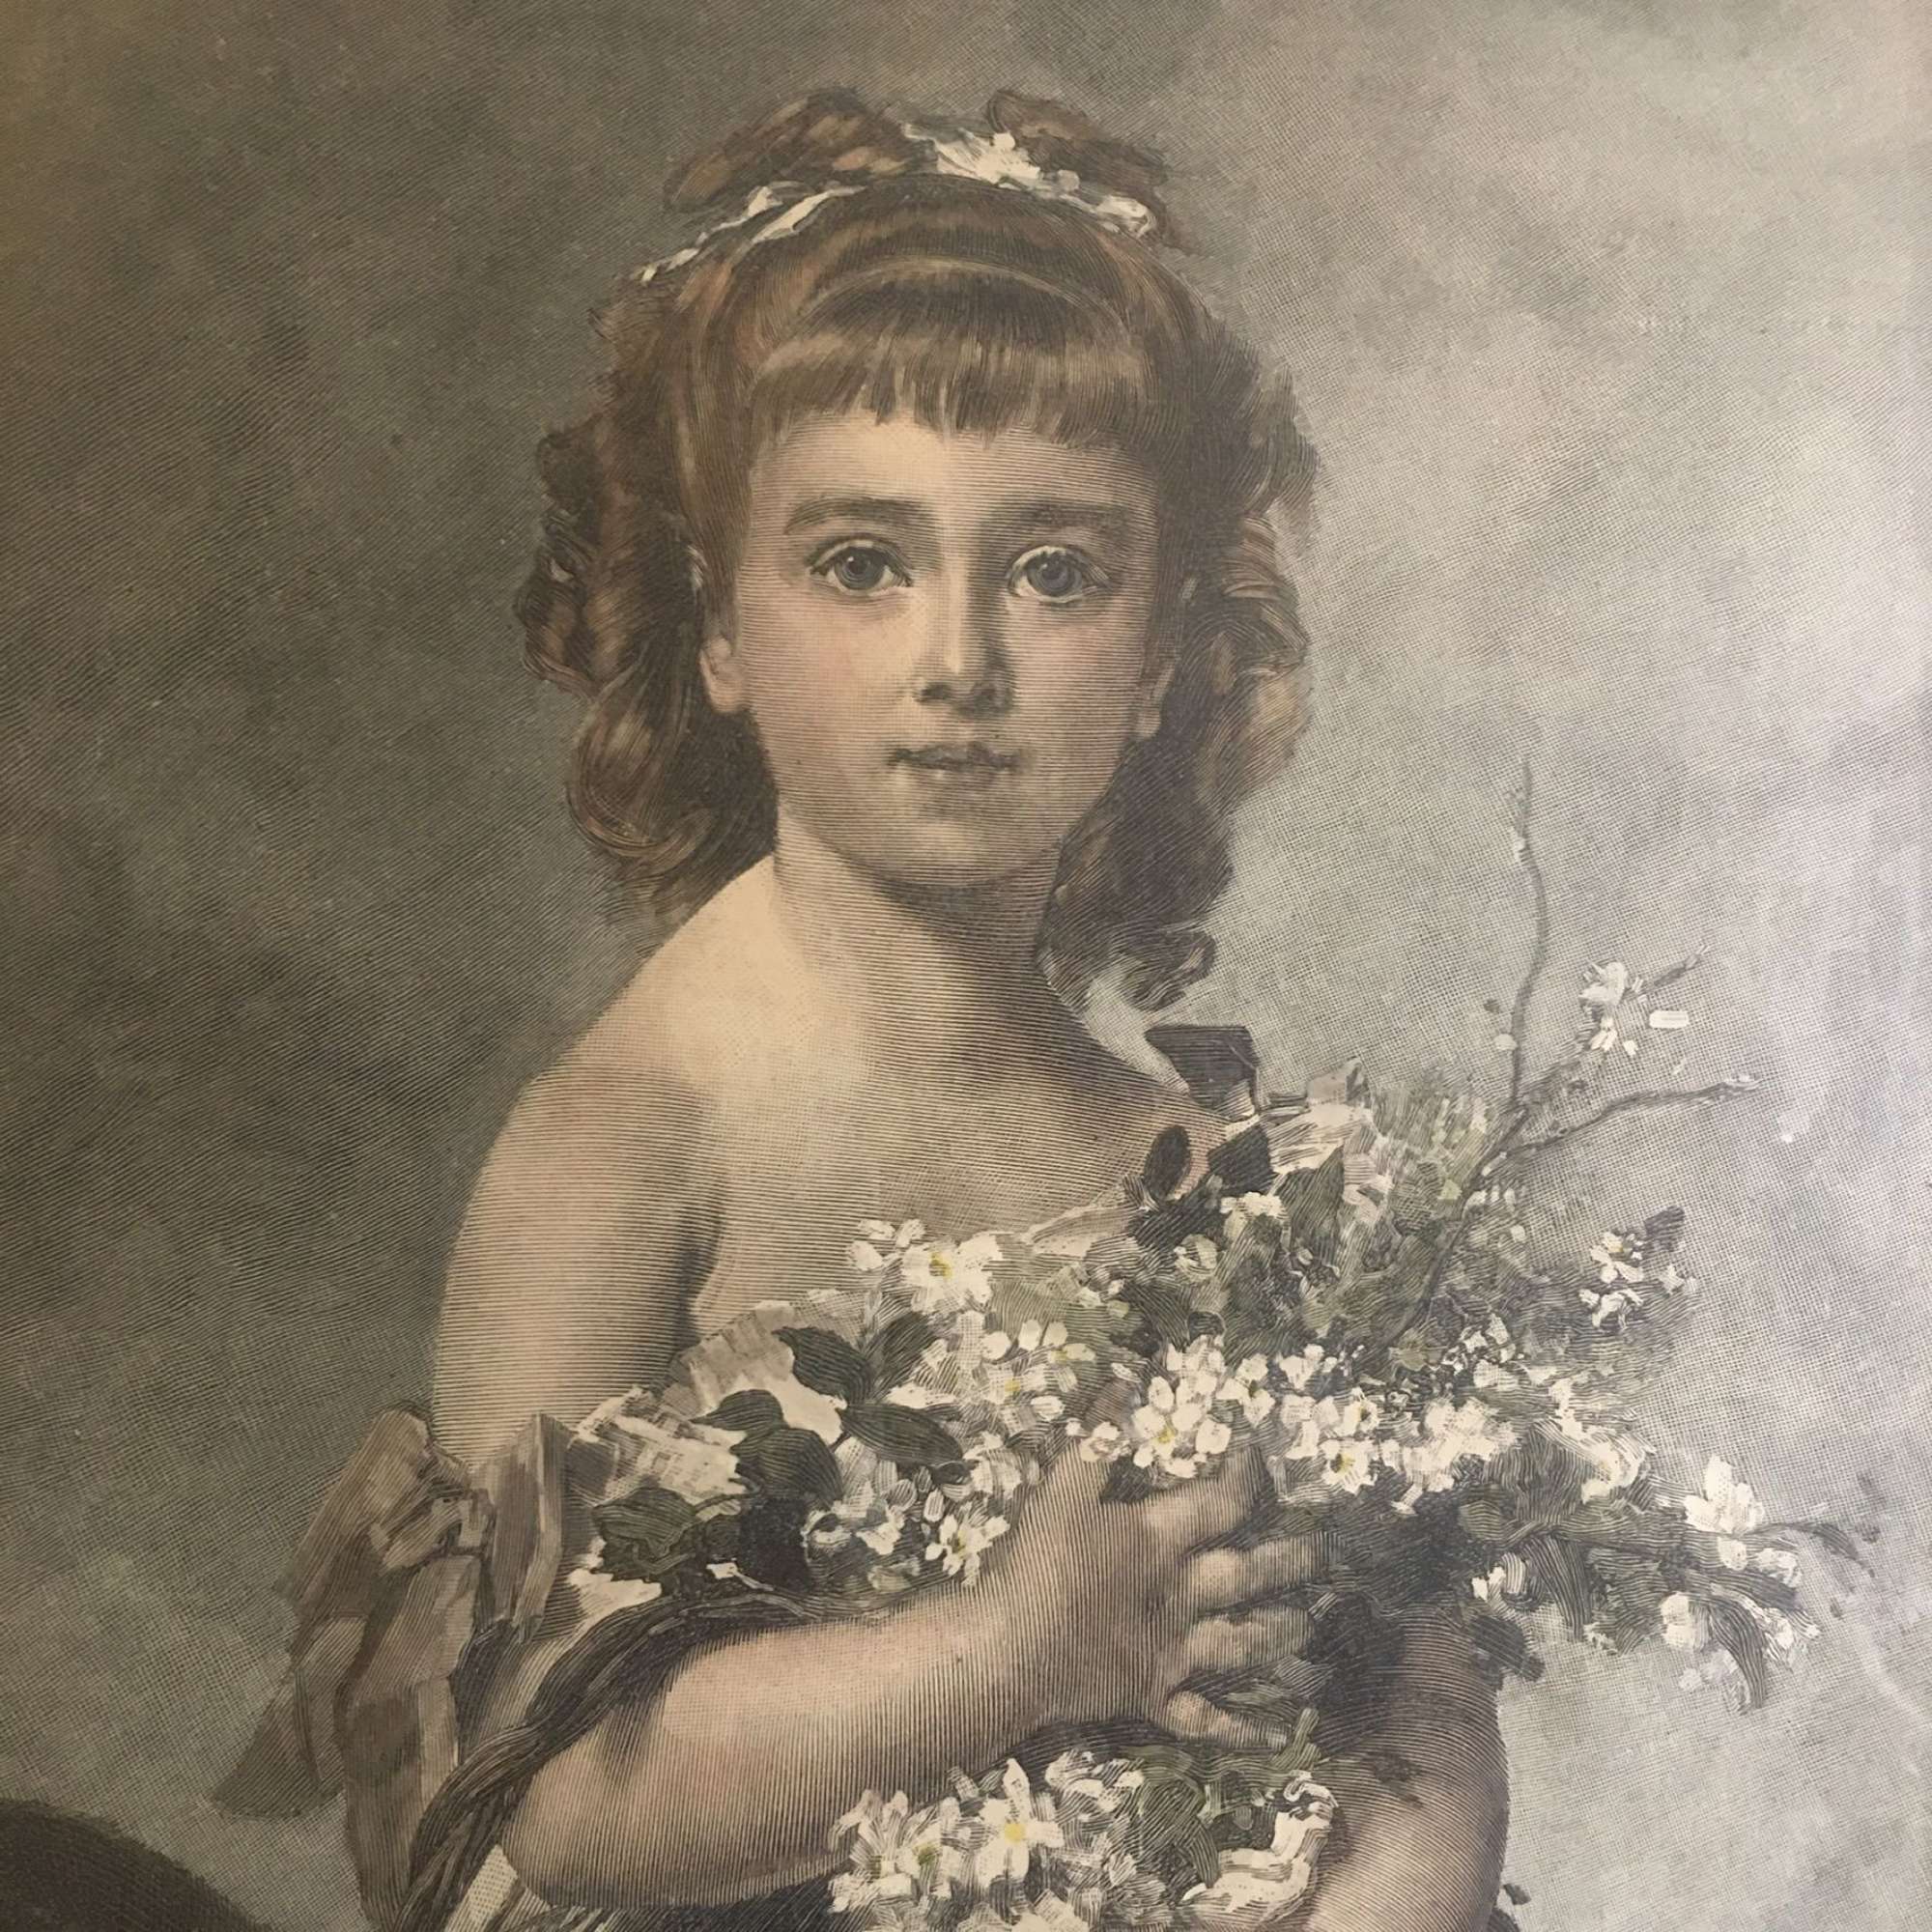 Antique hand-coloured print of girl 1881